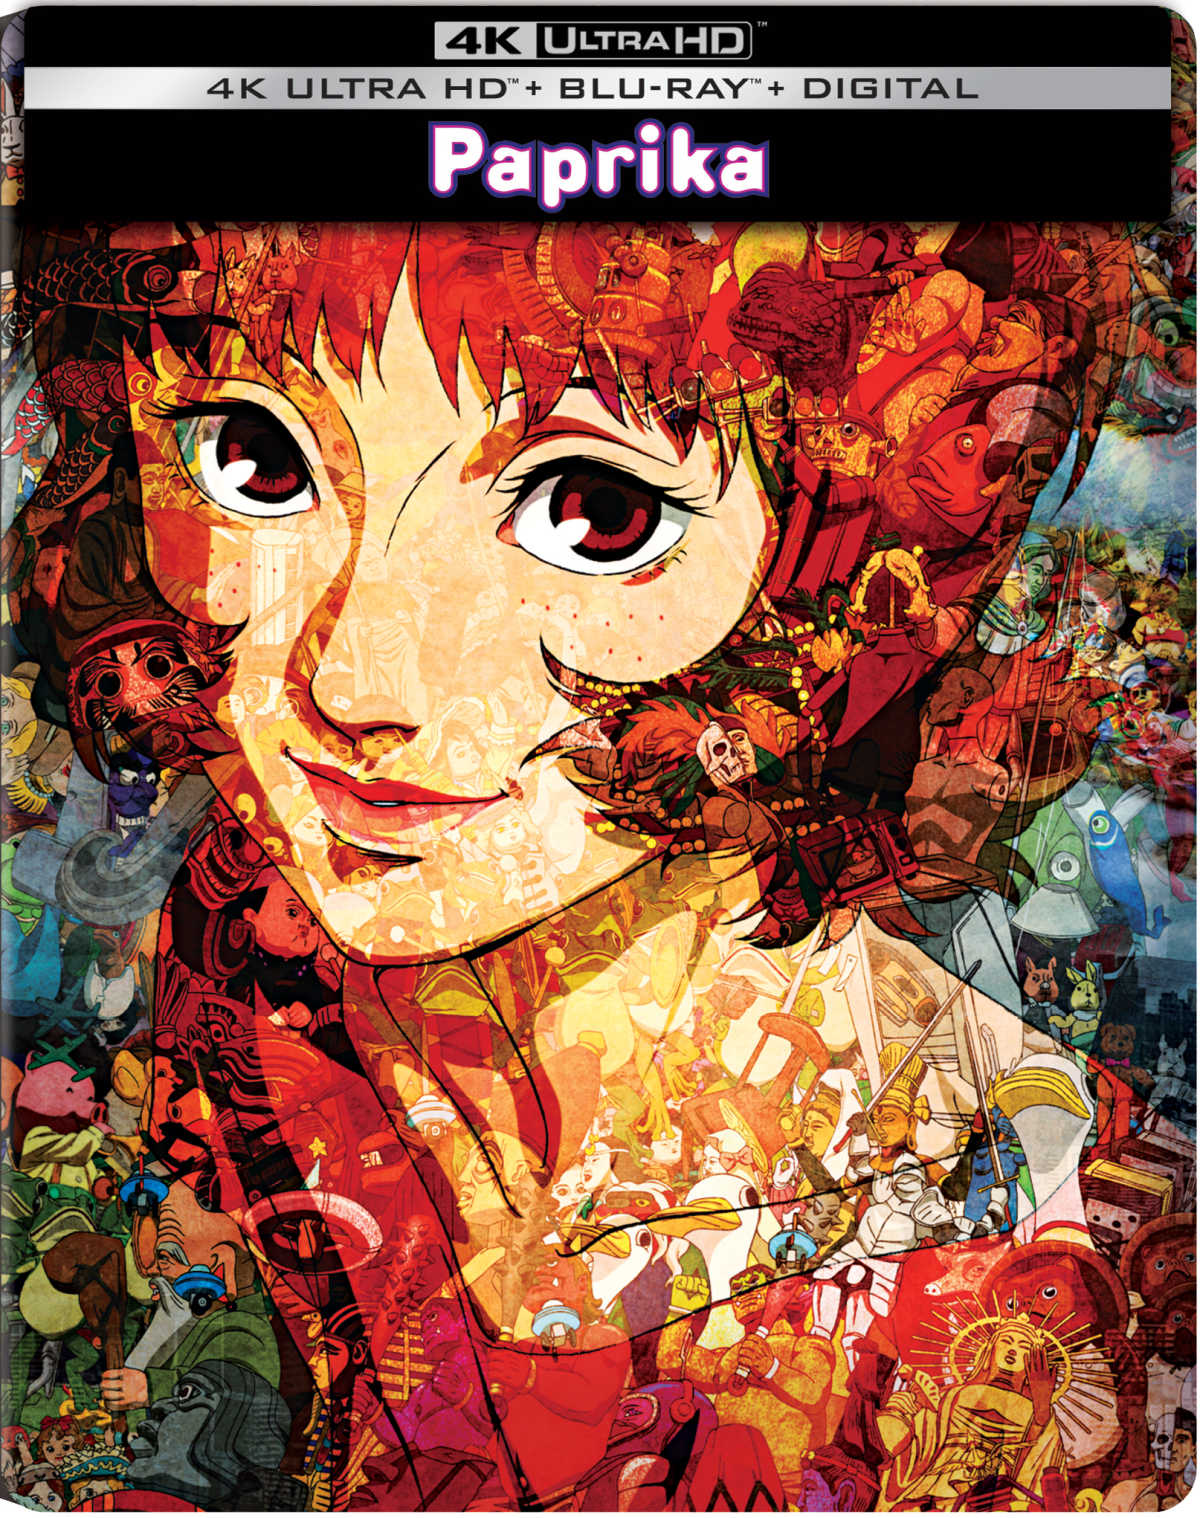 Enter the surreal world of Paprika with the Limited Edition SteelBook! This stunning release features the acclaimed anime film in 4K UHD + Blu-ray, a collectible SteelBook case, and bonus features. Perfect for fans and newcomers alike, dive into Satoshi Kon's visionary masterpiece (Rated R).